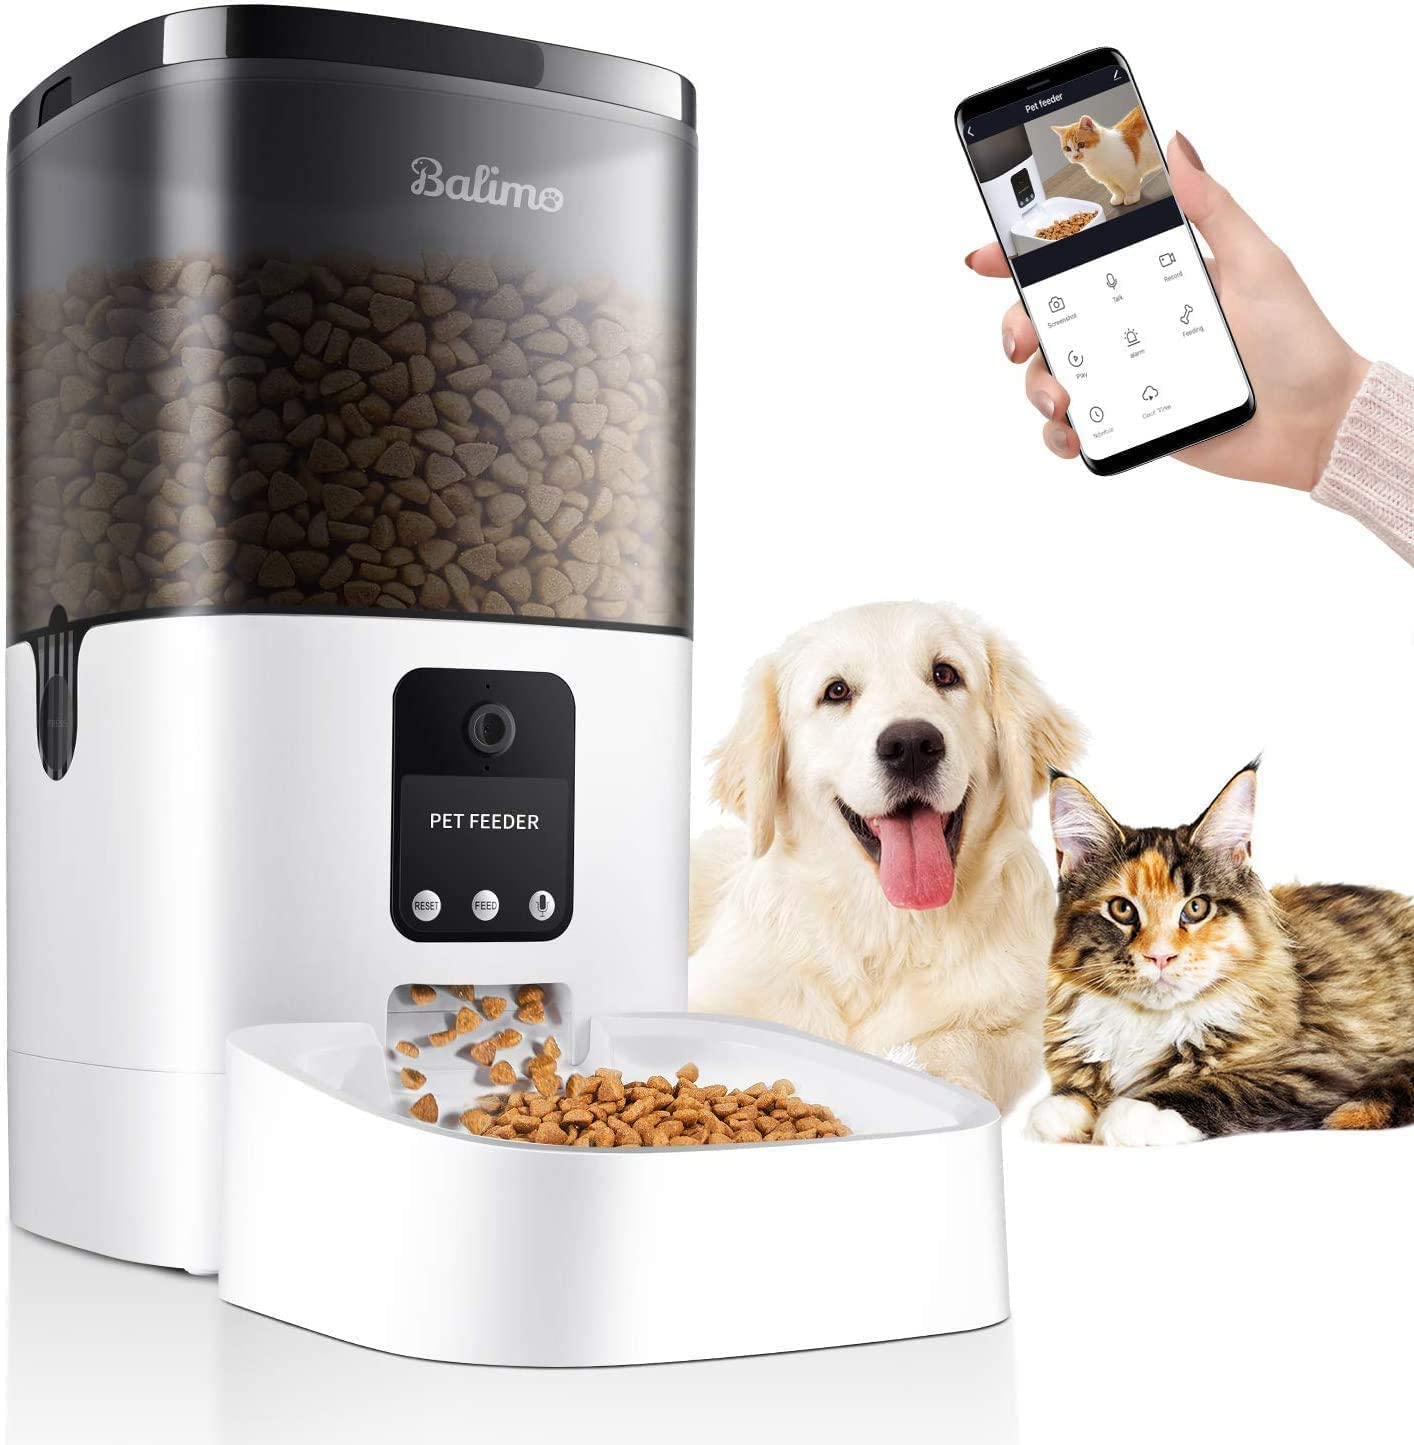 The Balimo LENA 4L Automatic Pet Feeder: Review